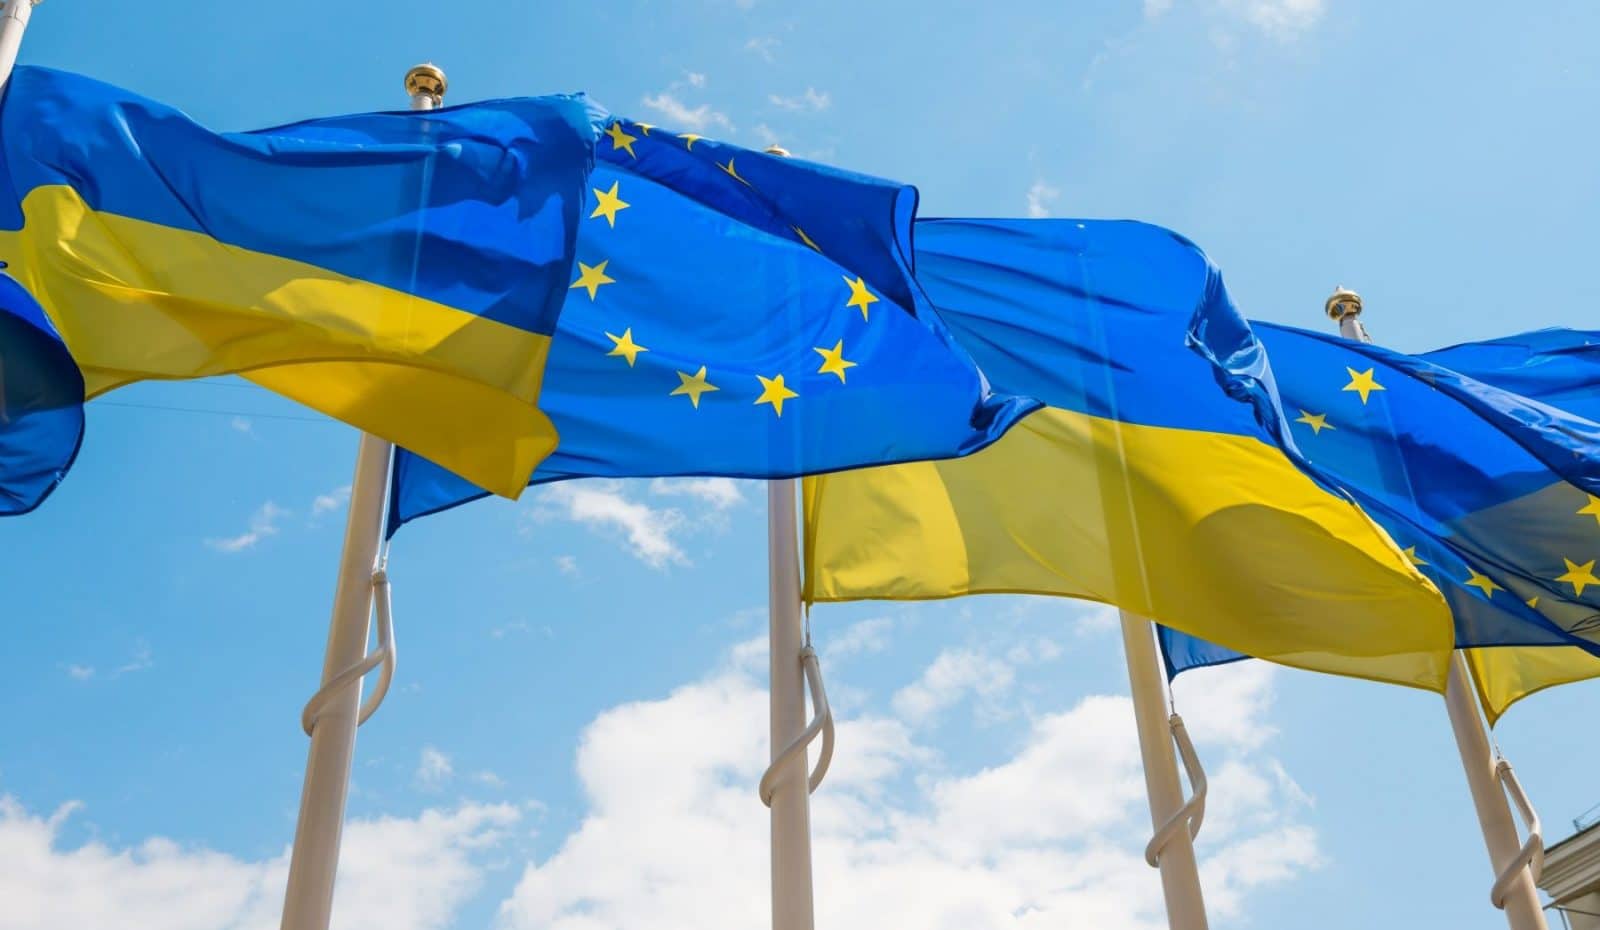 All 27 EU countries support candidate status for Ukraine